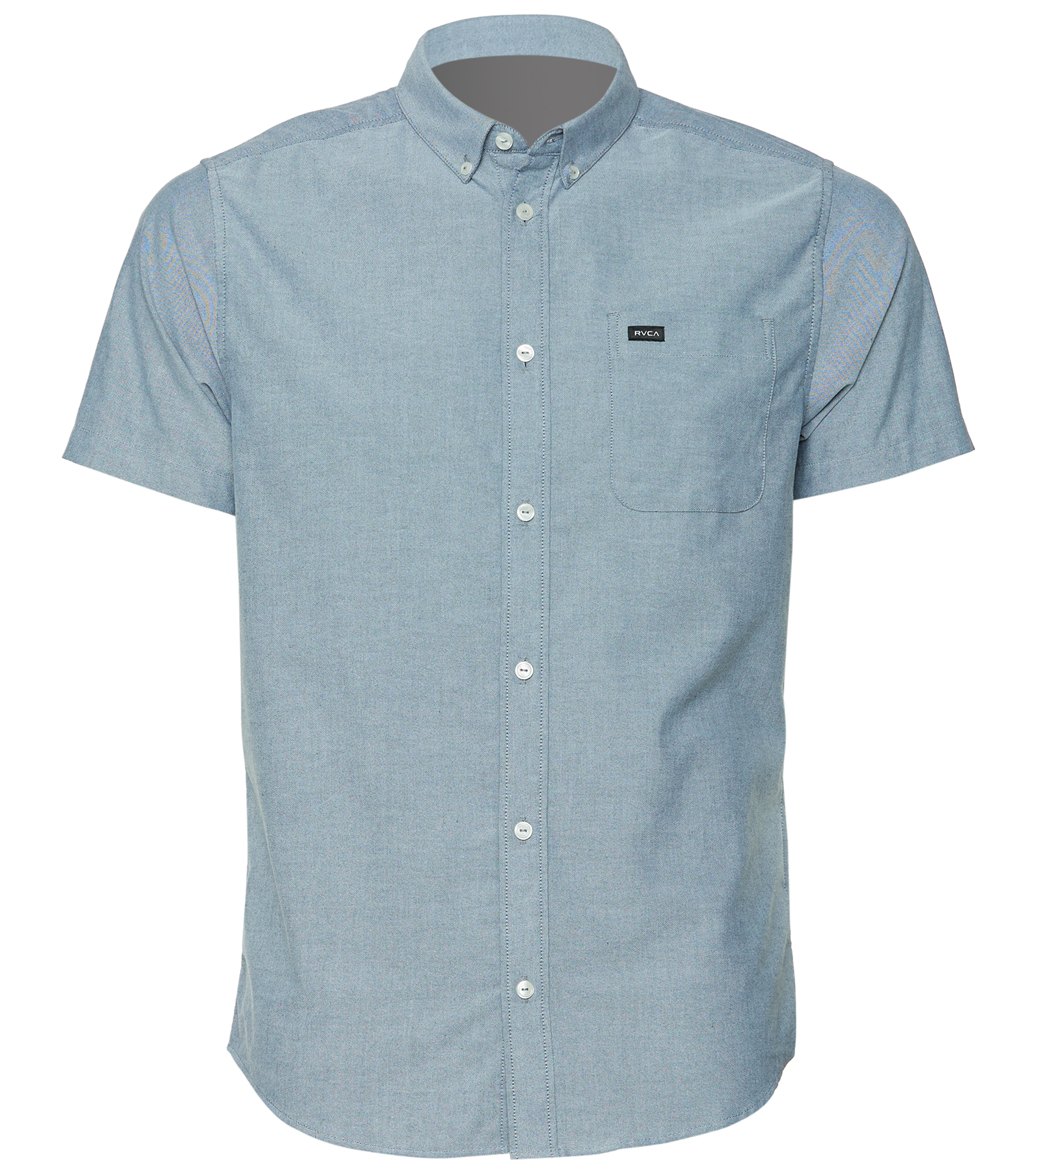 Rvca That'll Do Oxford Stretch Short Sleeve Shirt - Distant Blue Small Cotton/Polyester - Swimoutlet.com